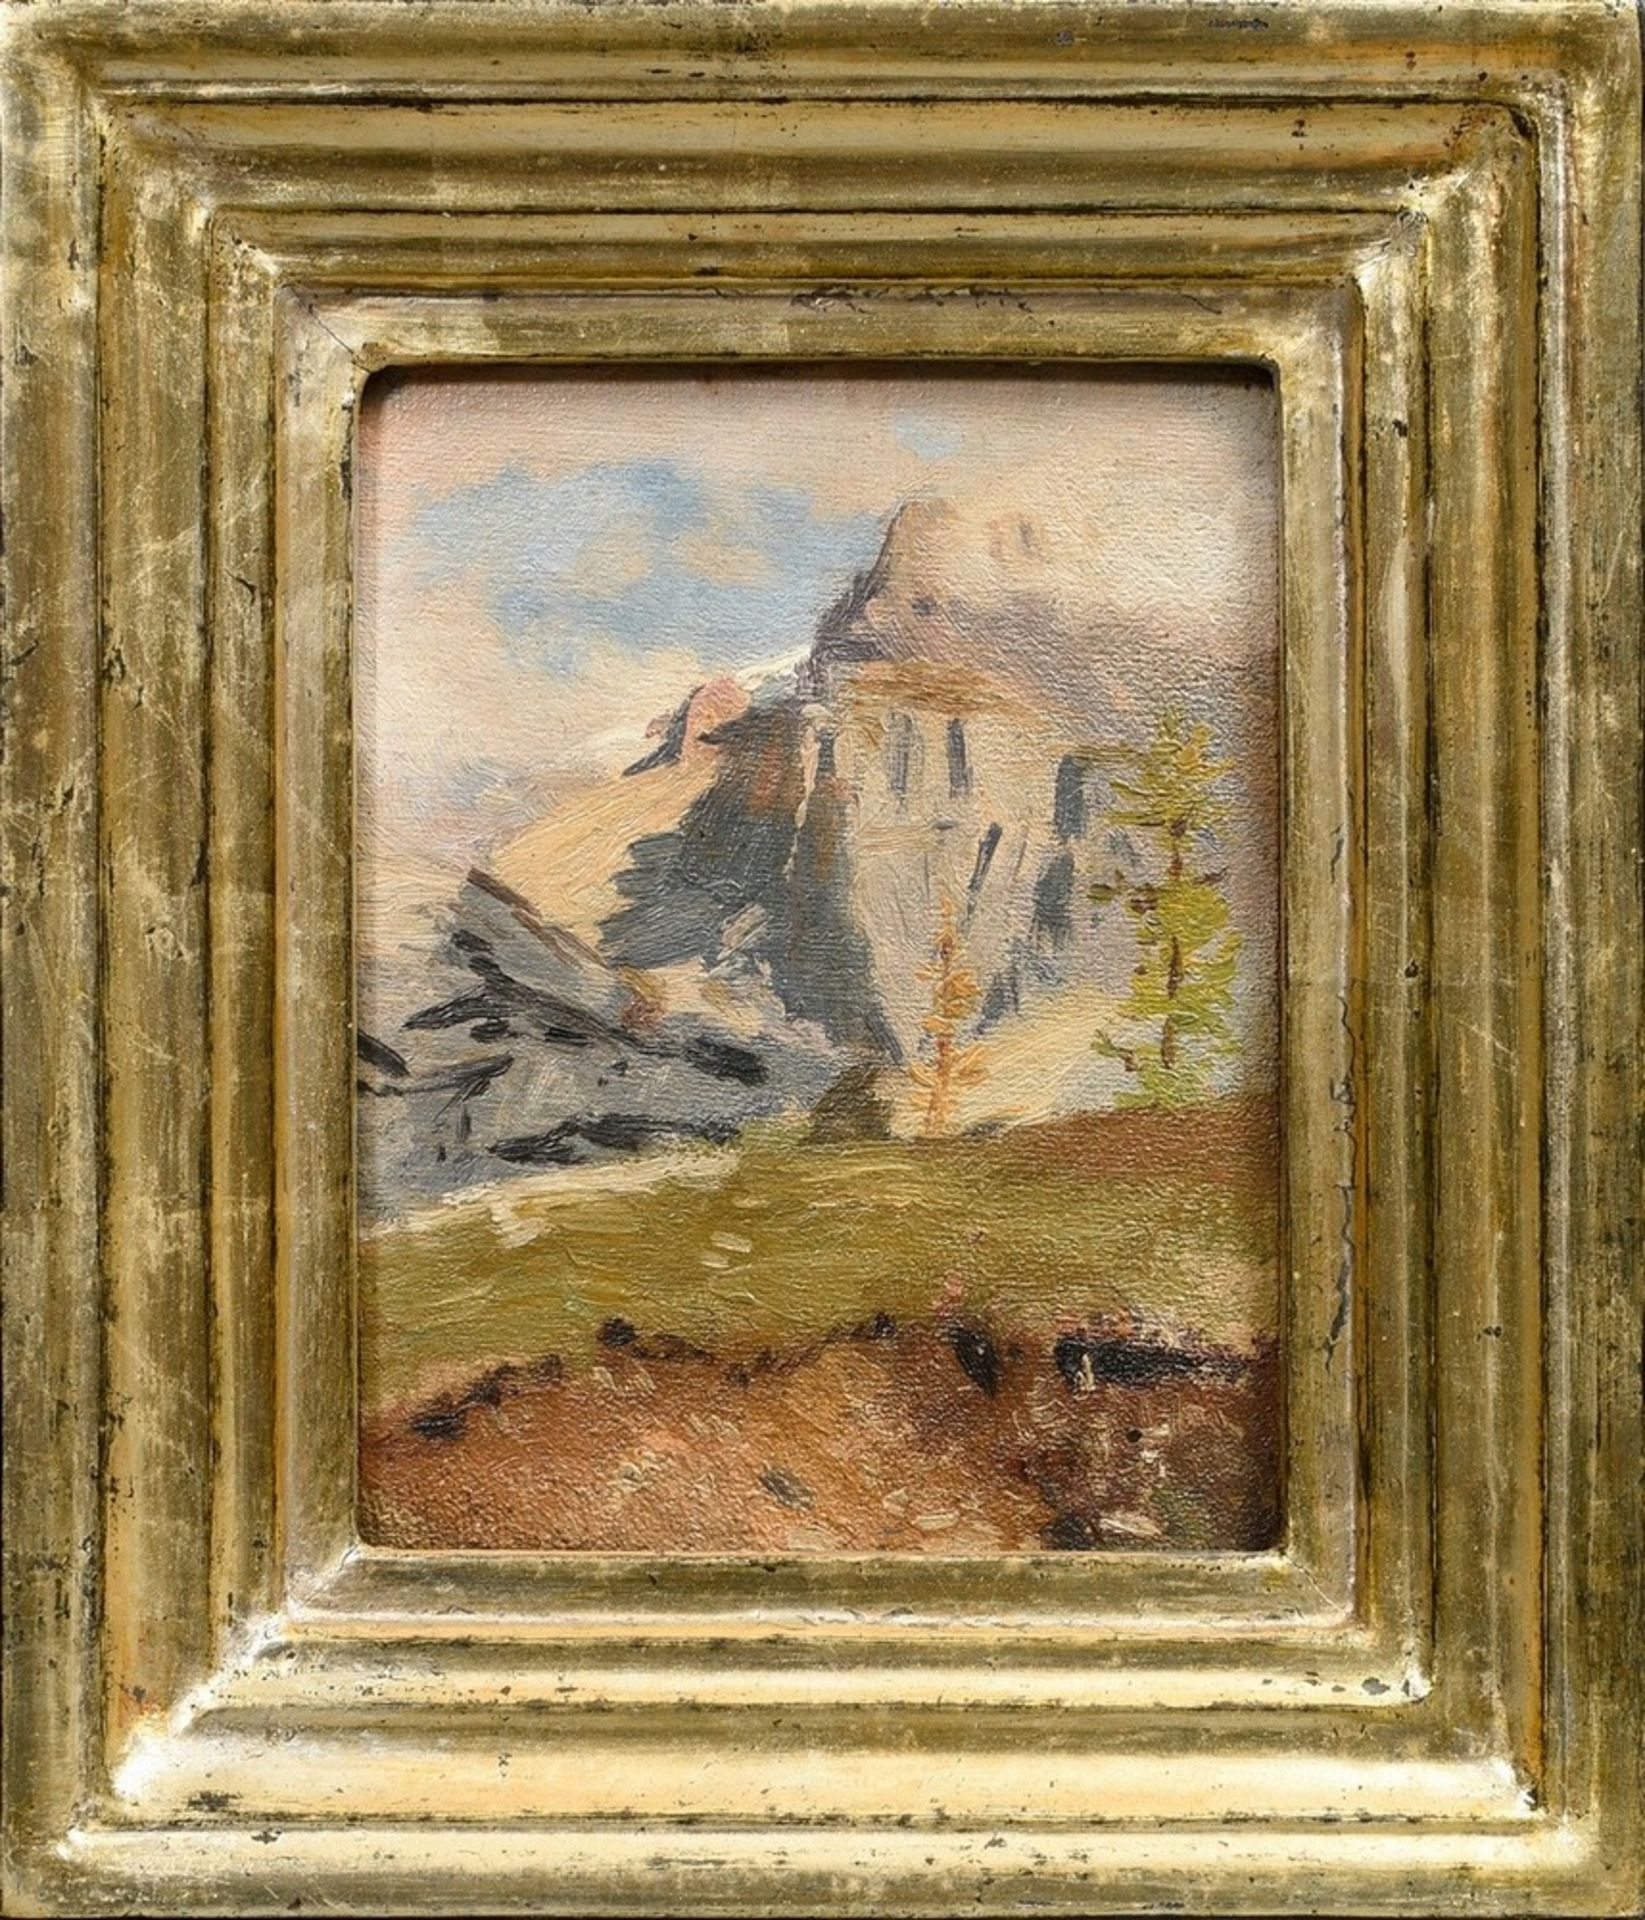 Unknown artist c. 1900 "Matterhorn", oil/canvas mounted on cardboard, stepped, gilded frame, 16.5x1 - Image 2 of 3